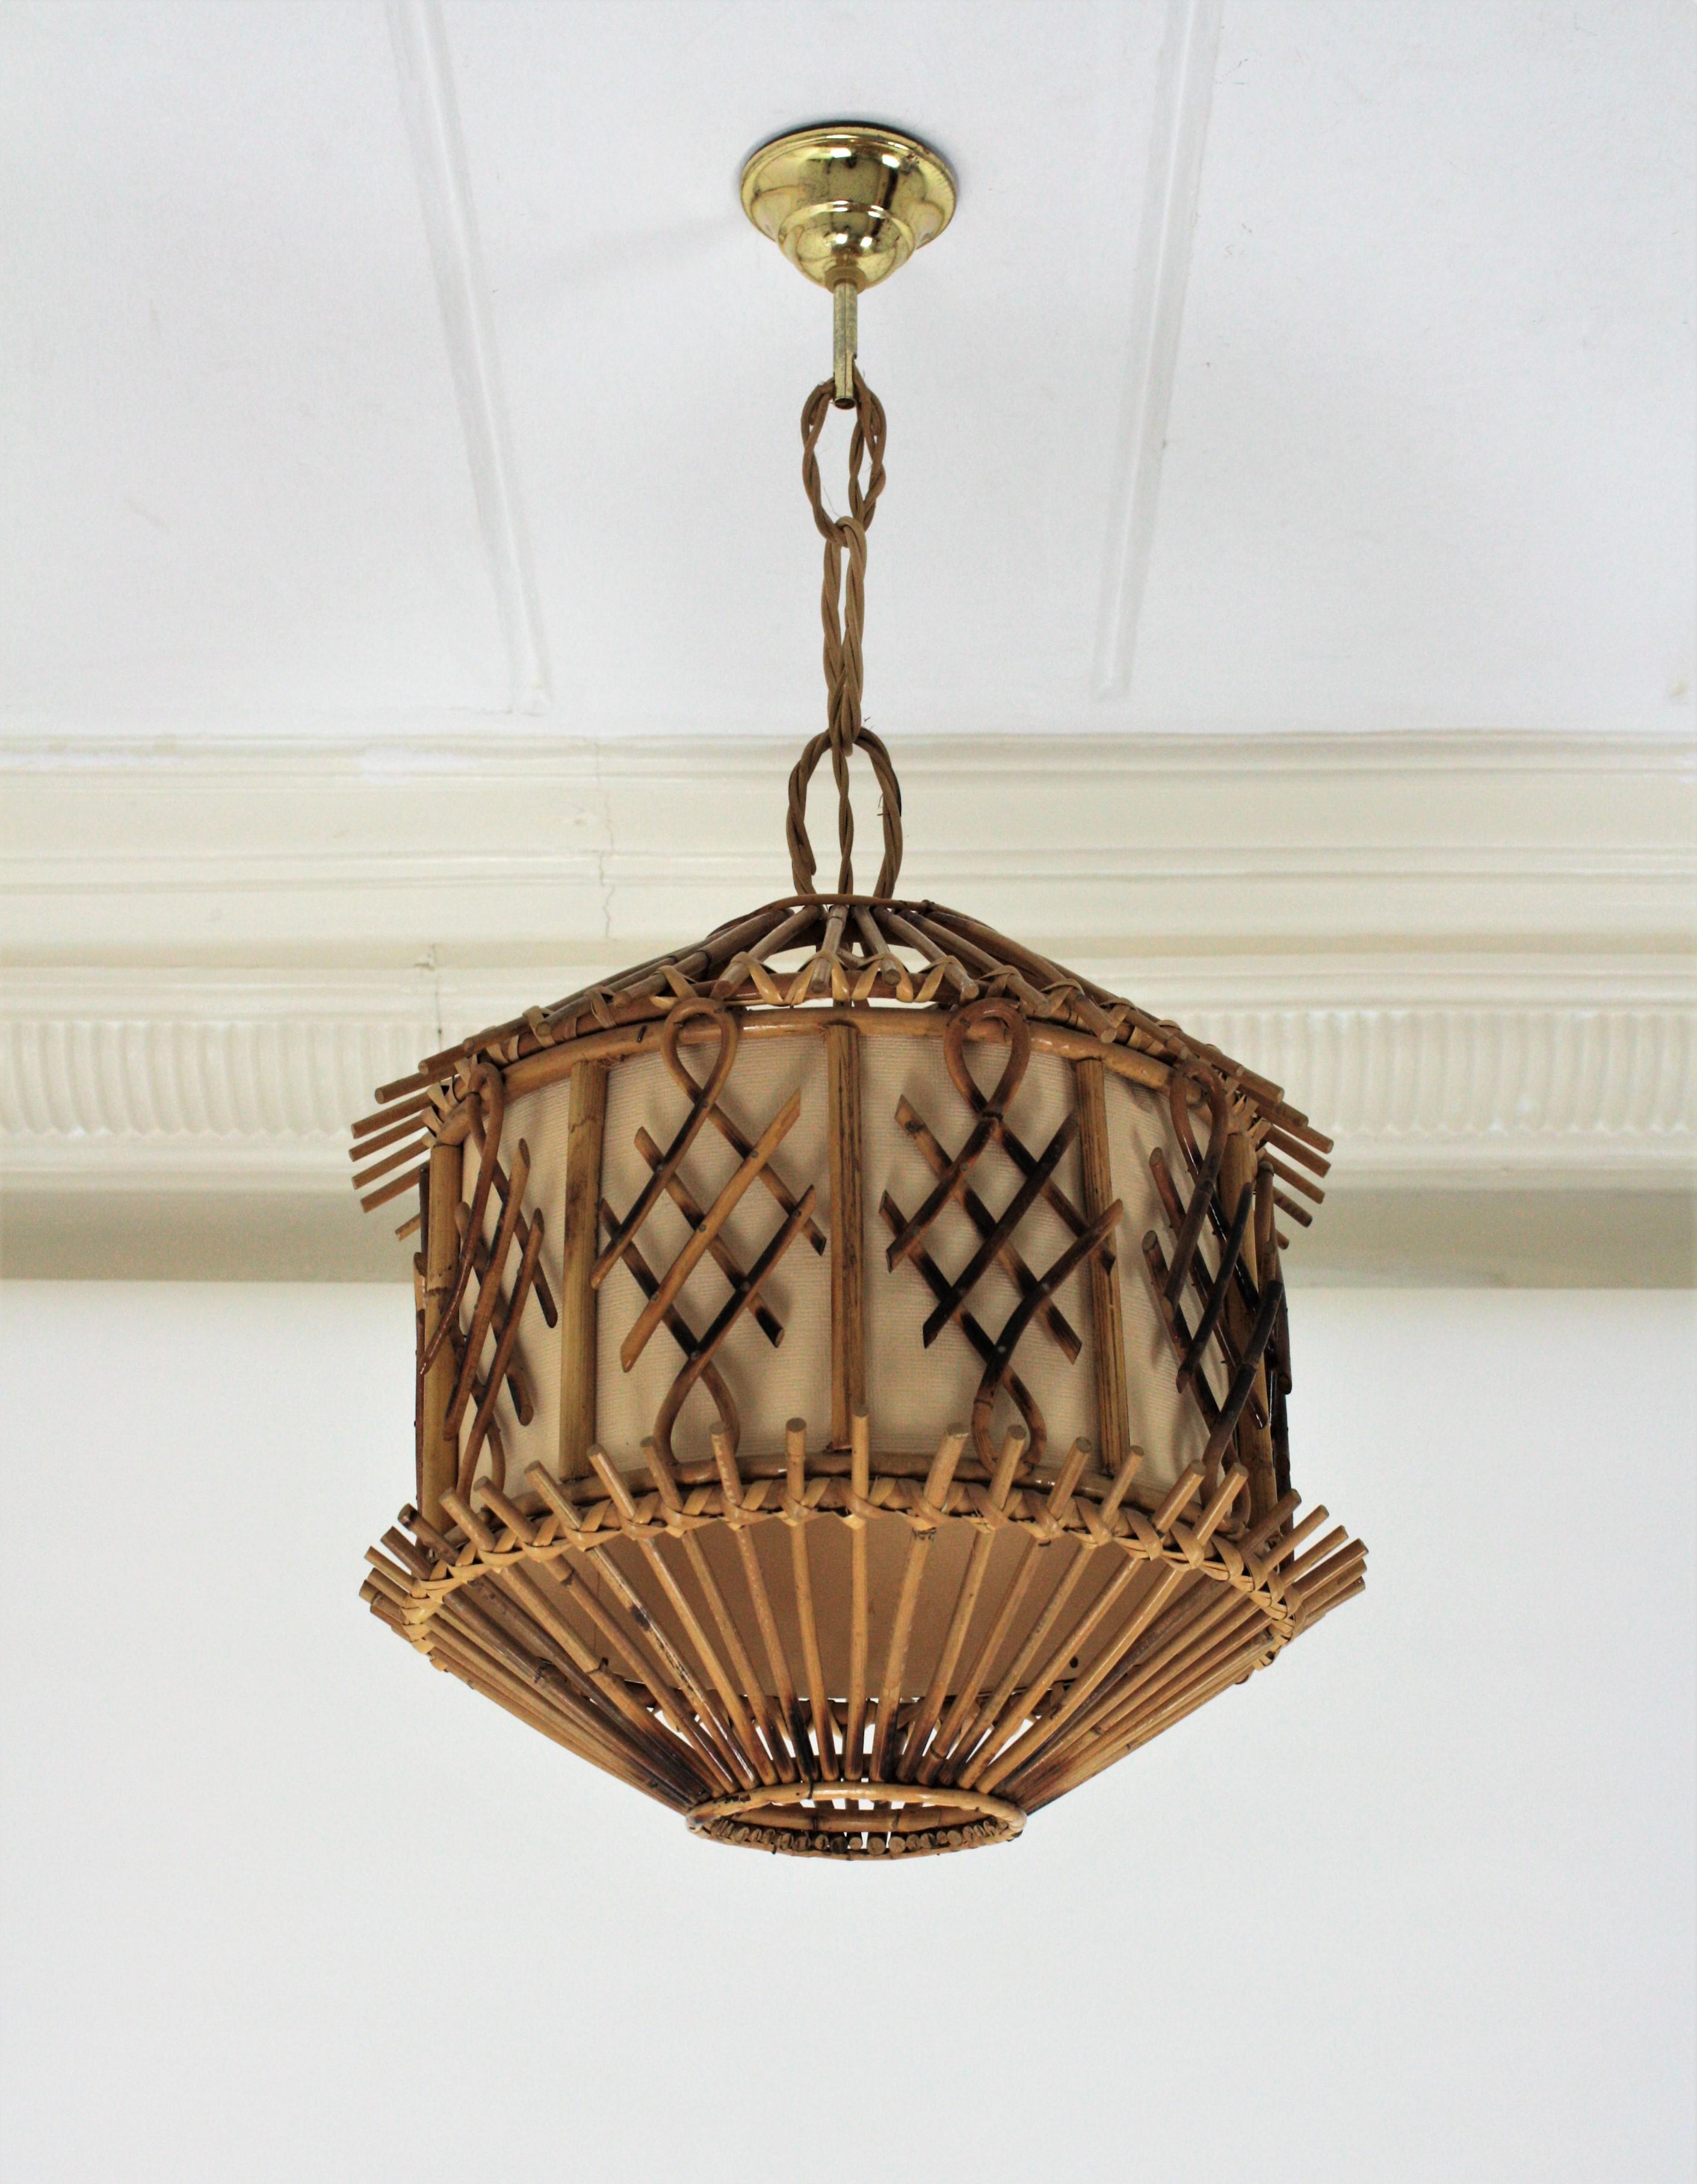 20th Century French Modernist Rattan Pendant Lantern / Hanging Light with Chinoiserie Accents